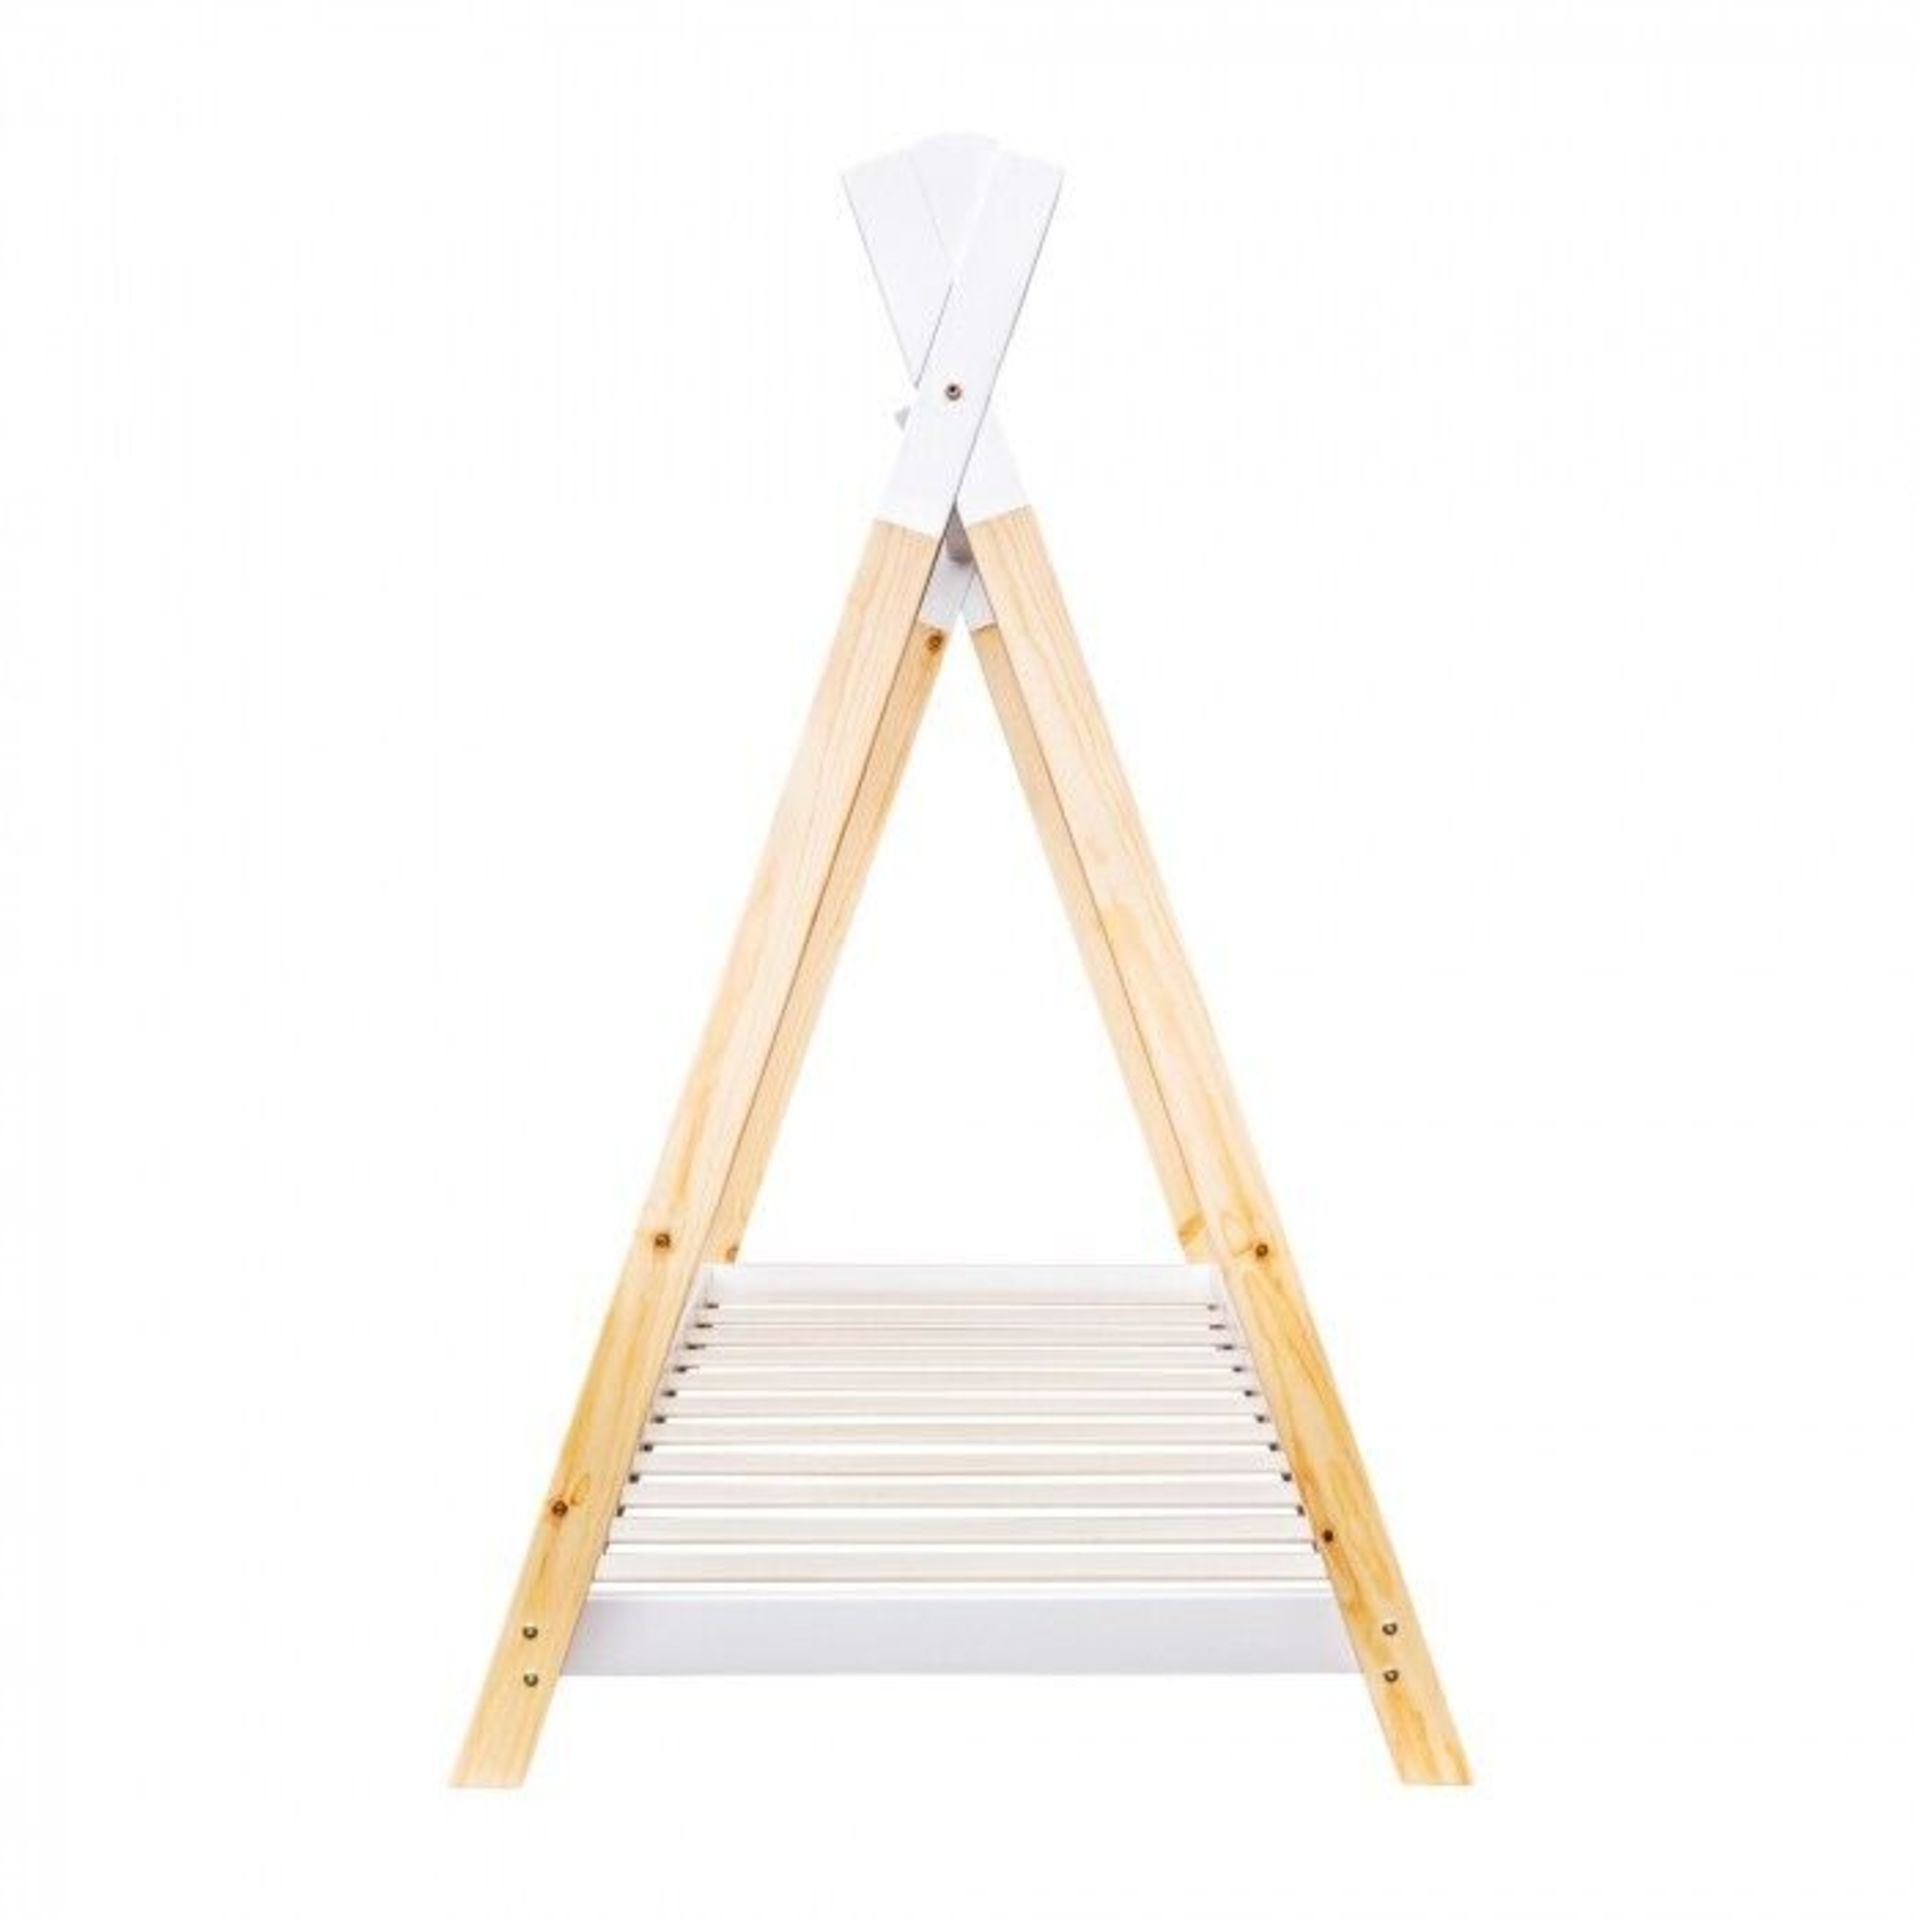 Kinder Valley Teepee Toddler Bed Two-Tone - Image 2 of 5